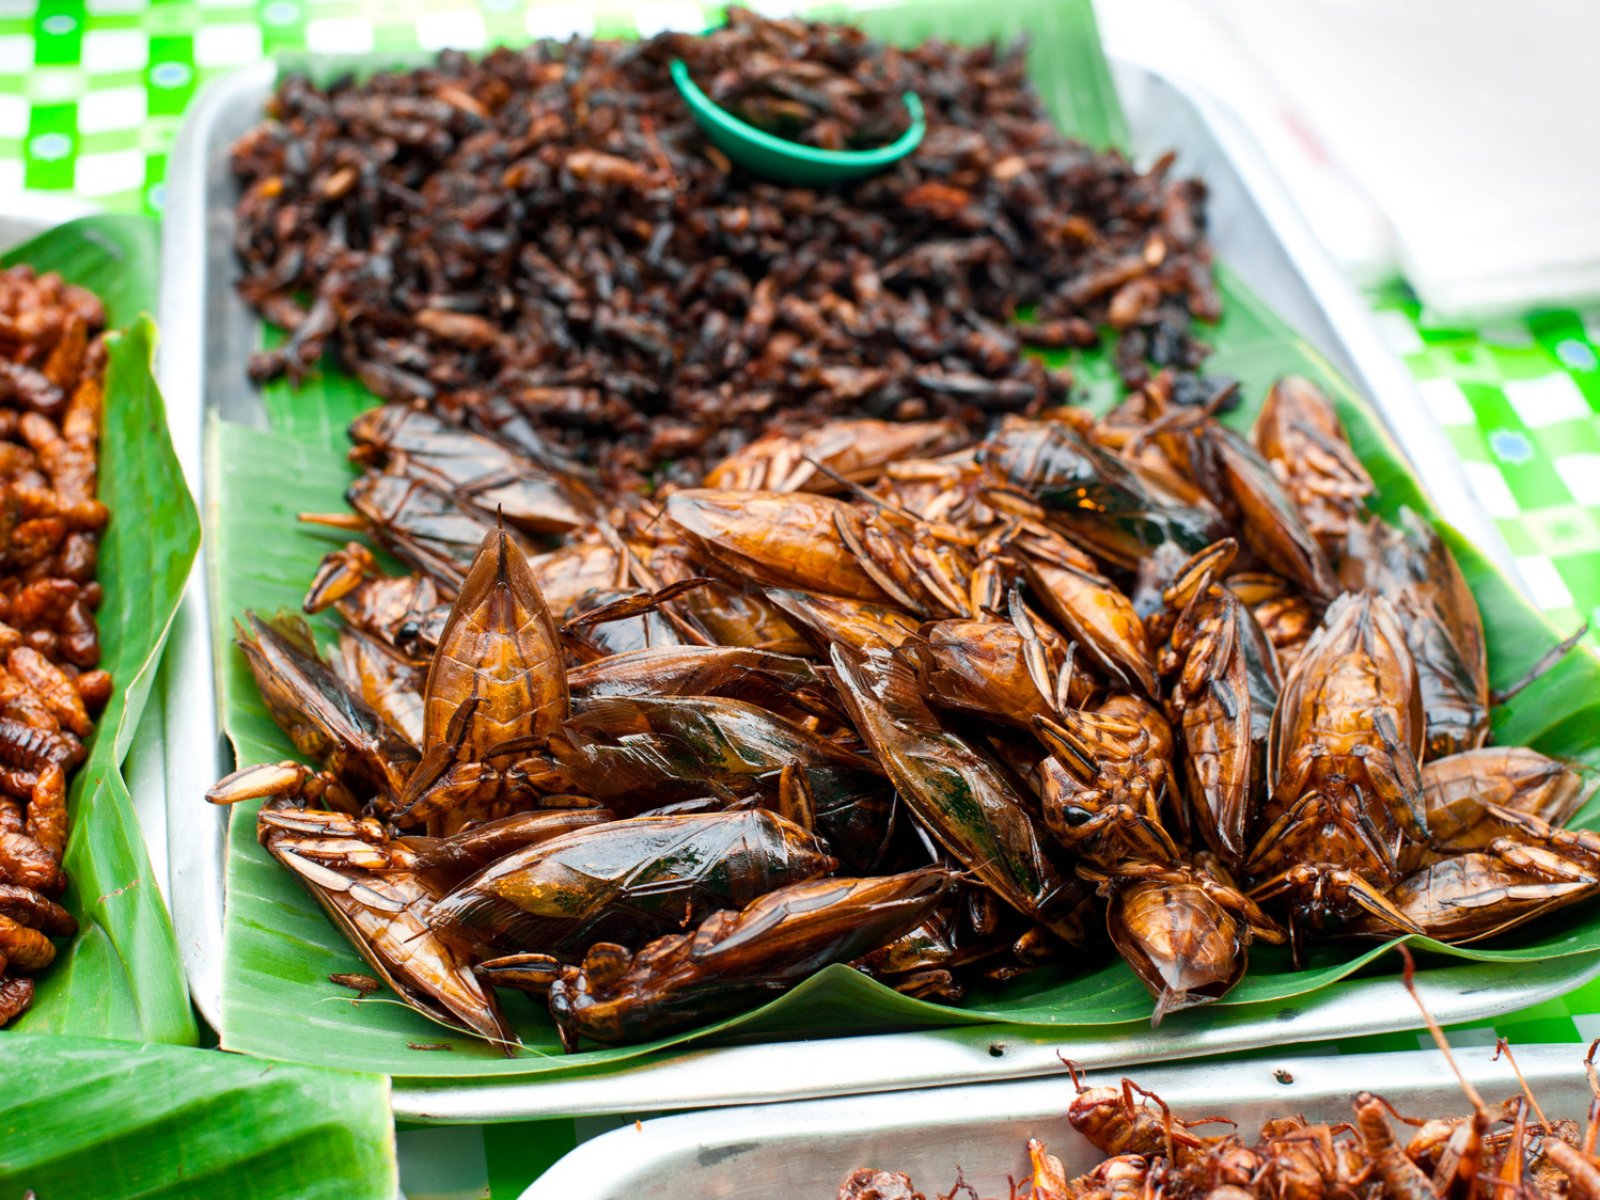 How to try the roasted crickets in Phuket